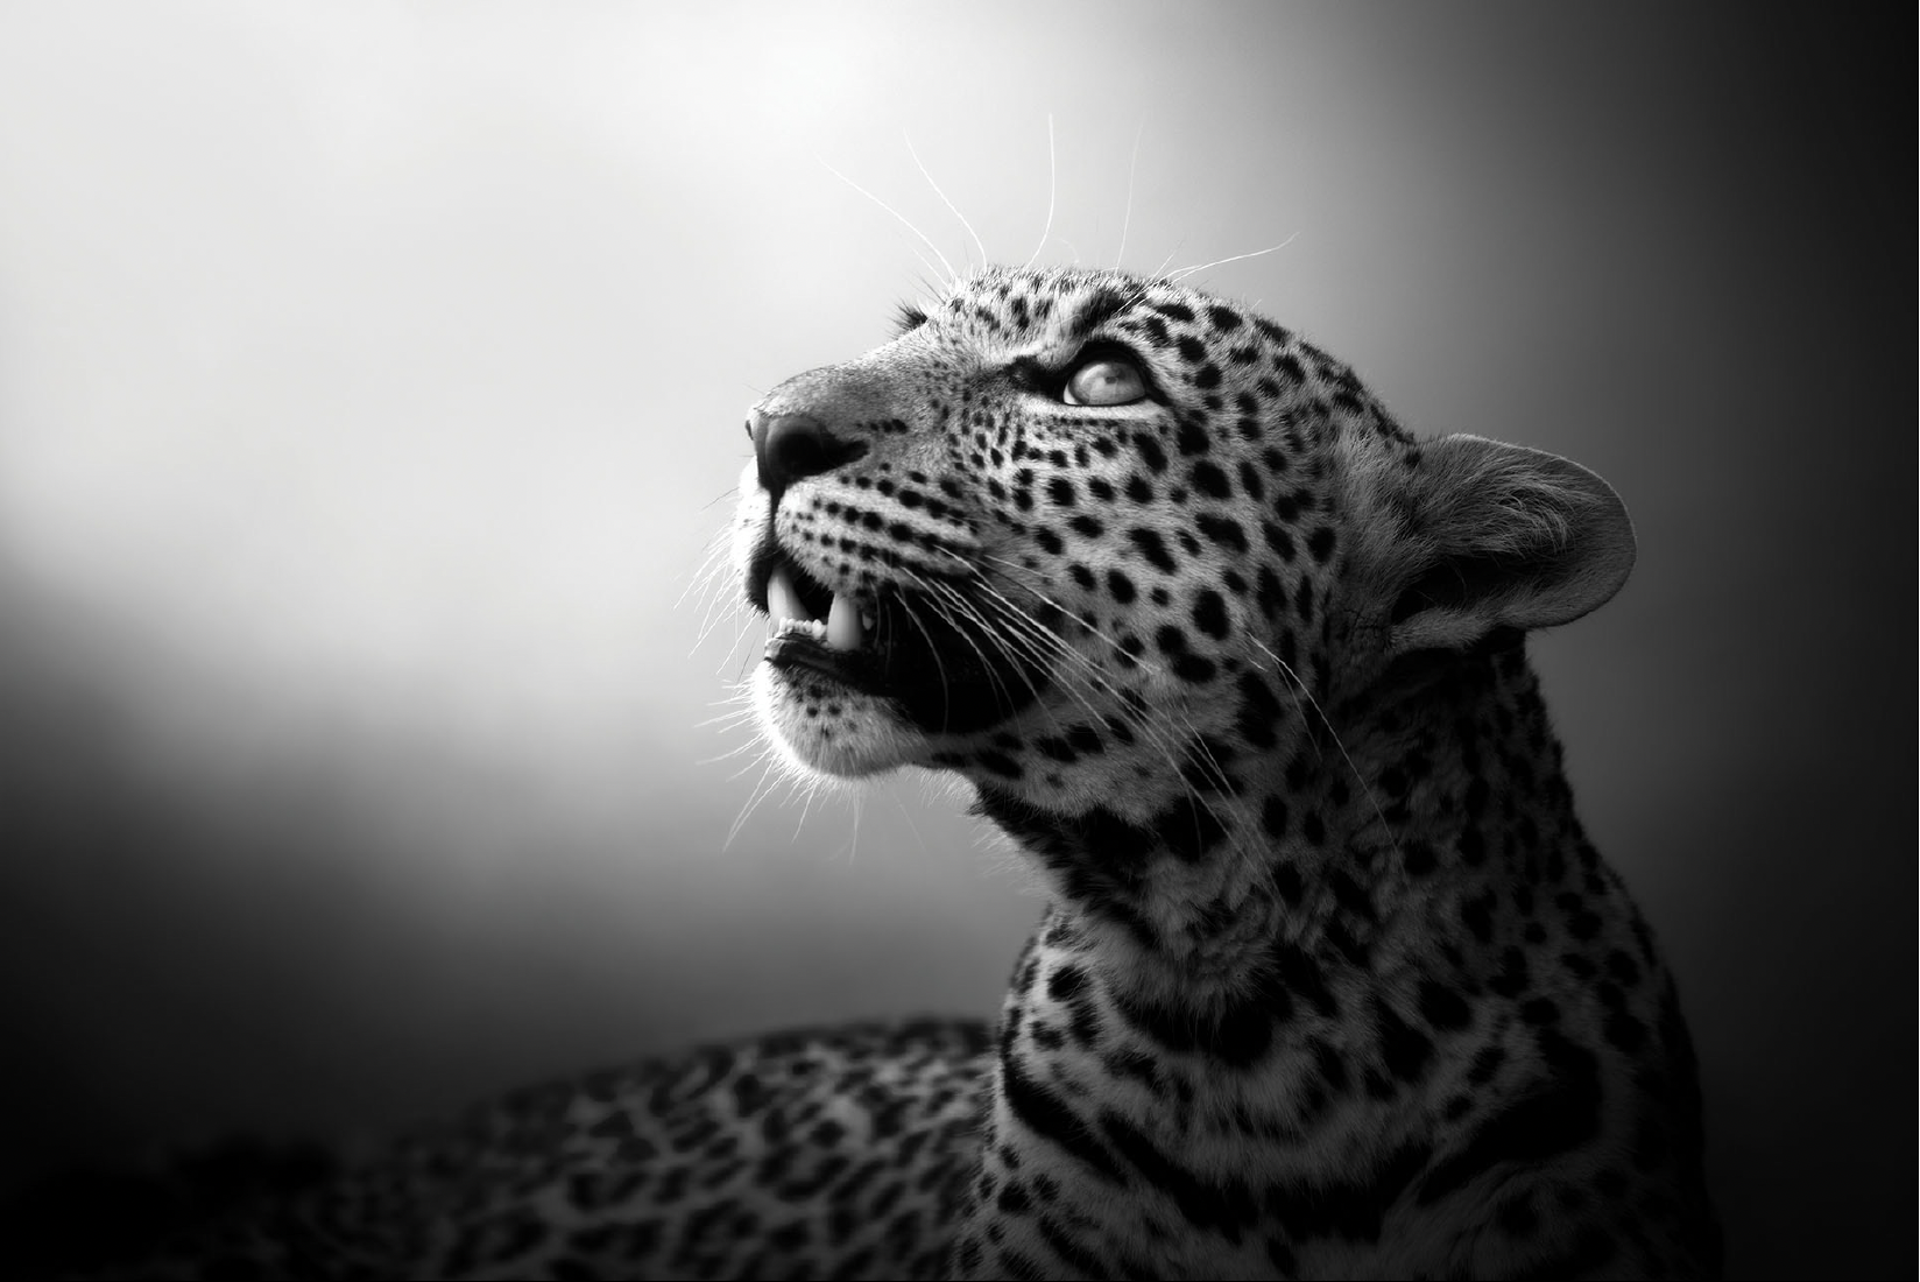 Soul of the Leopard by Björn Persson